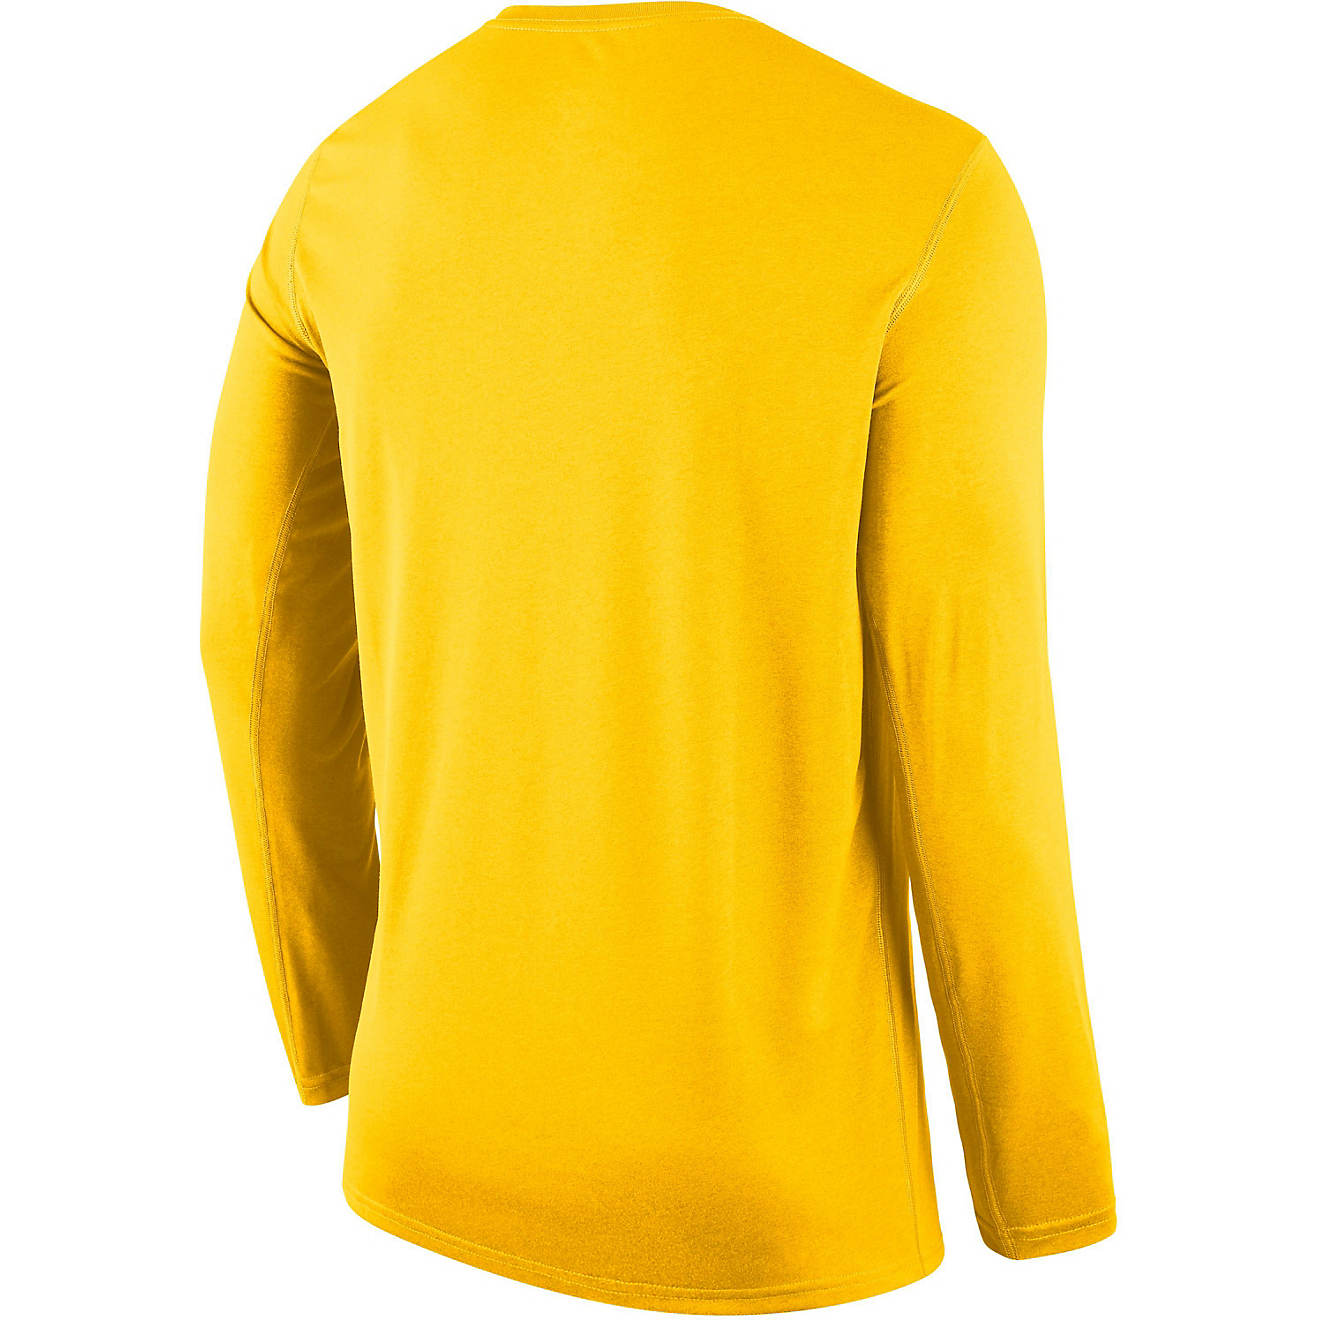 Nike Men's Indiana Pacers Dri-FIT Practice Long Sleeve T-shirt | Academy